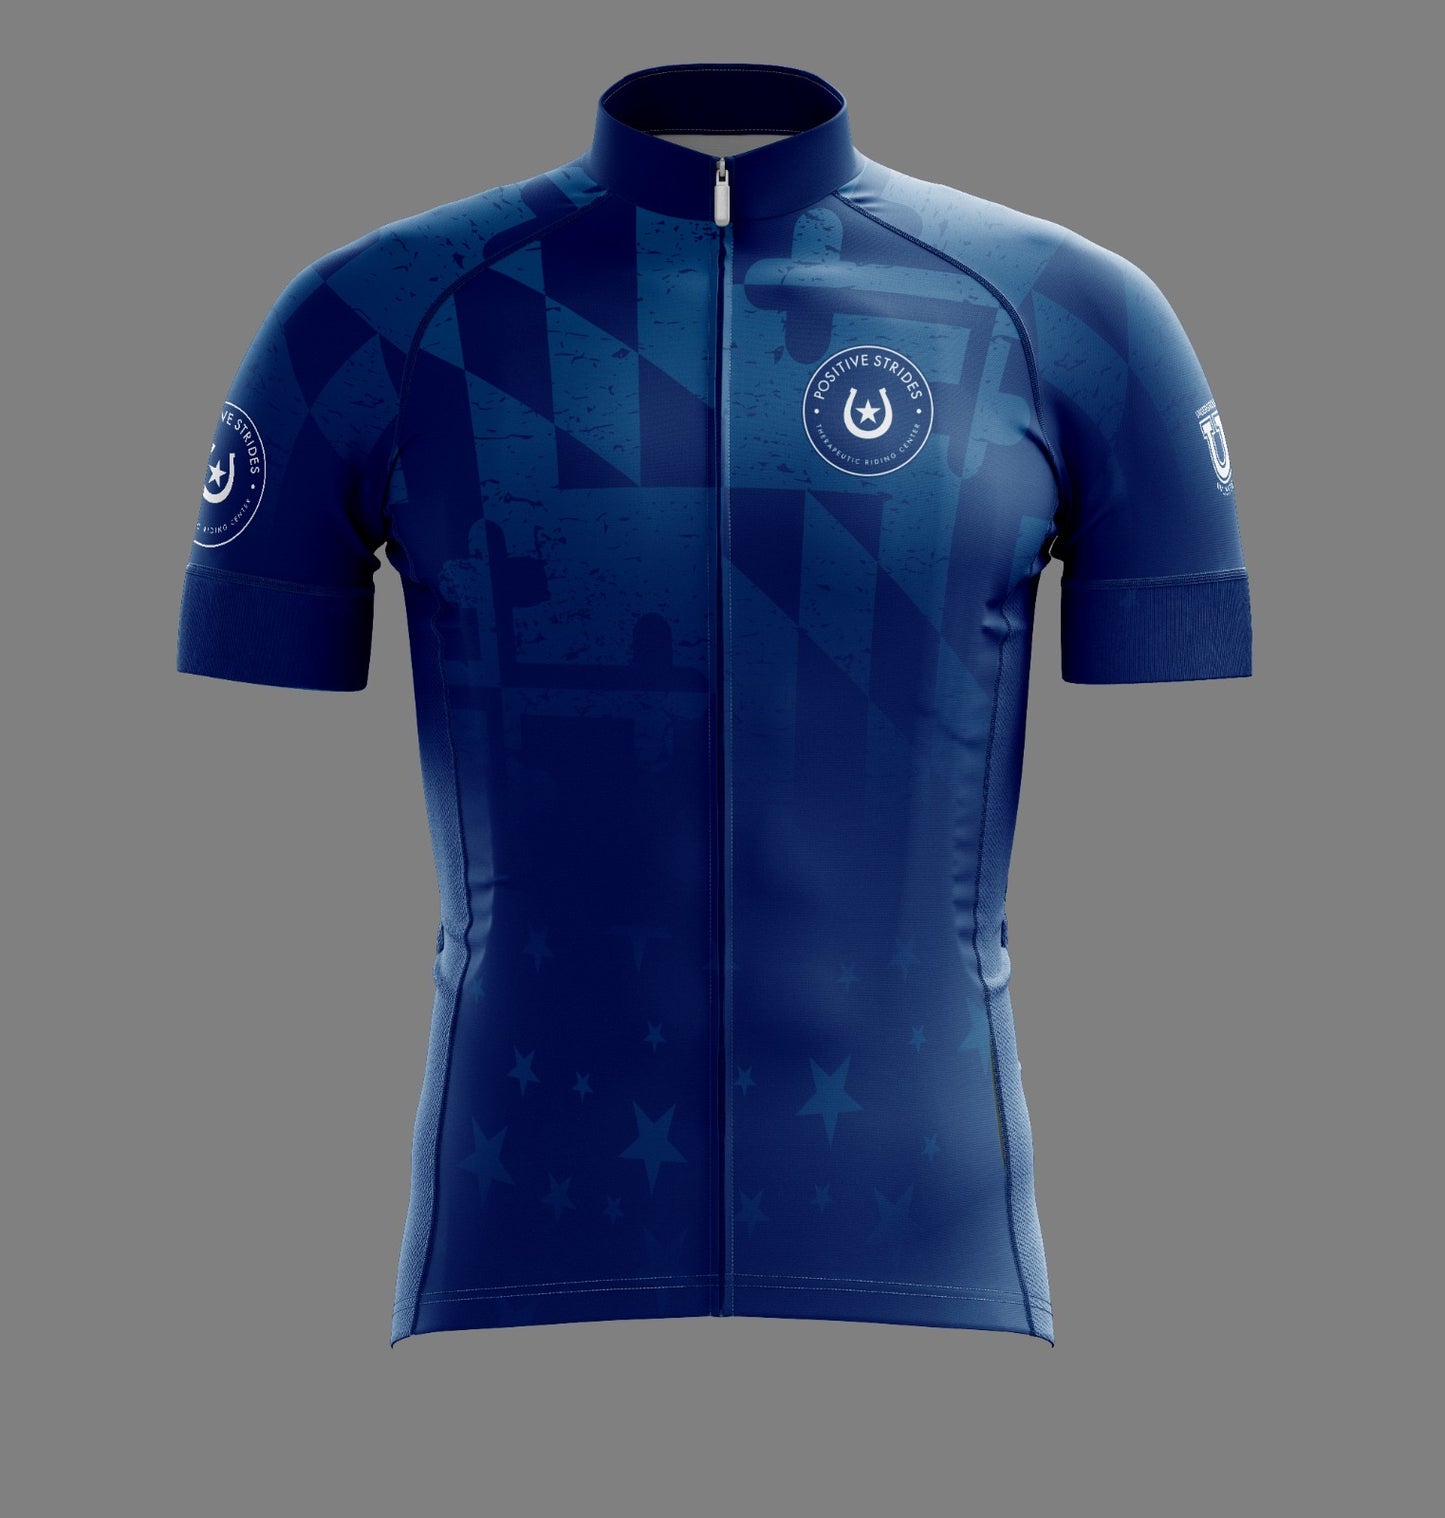 Positive Strides "Spring Classic" Performance Cycling Jersey ~ Navy Maryland Fade